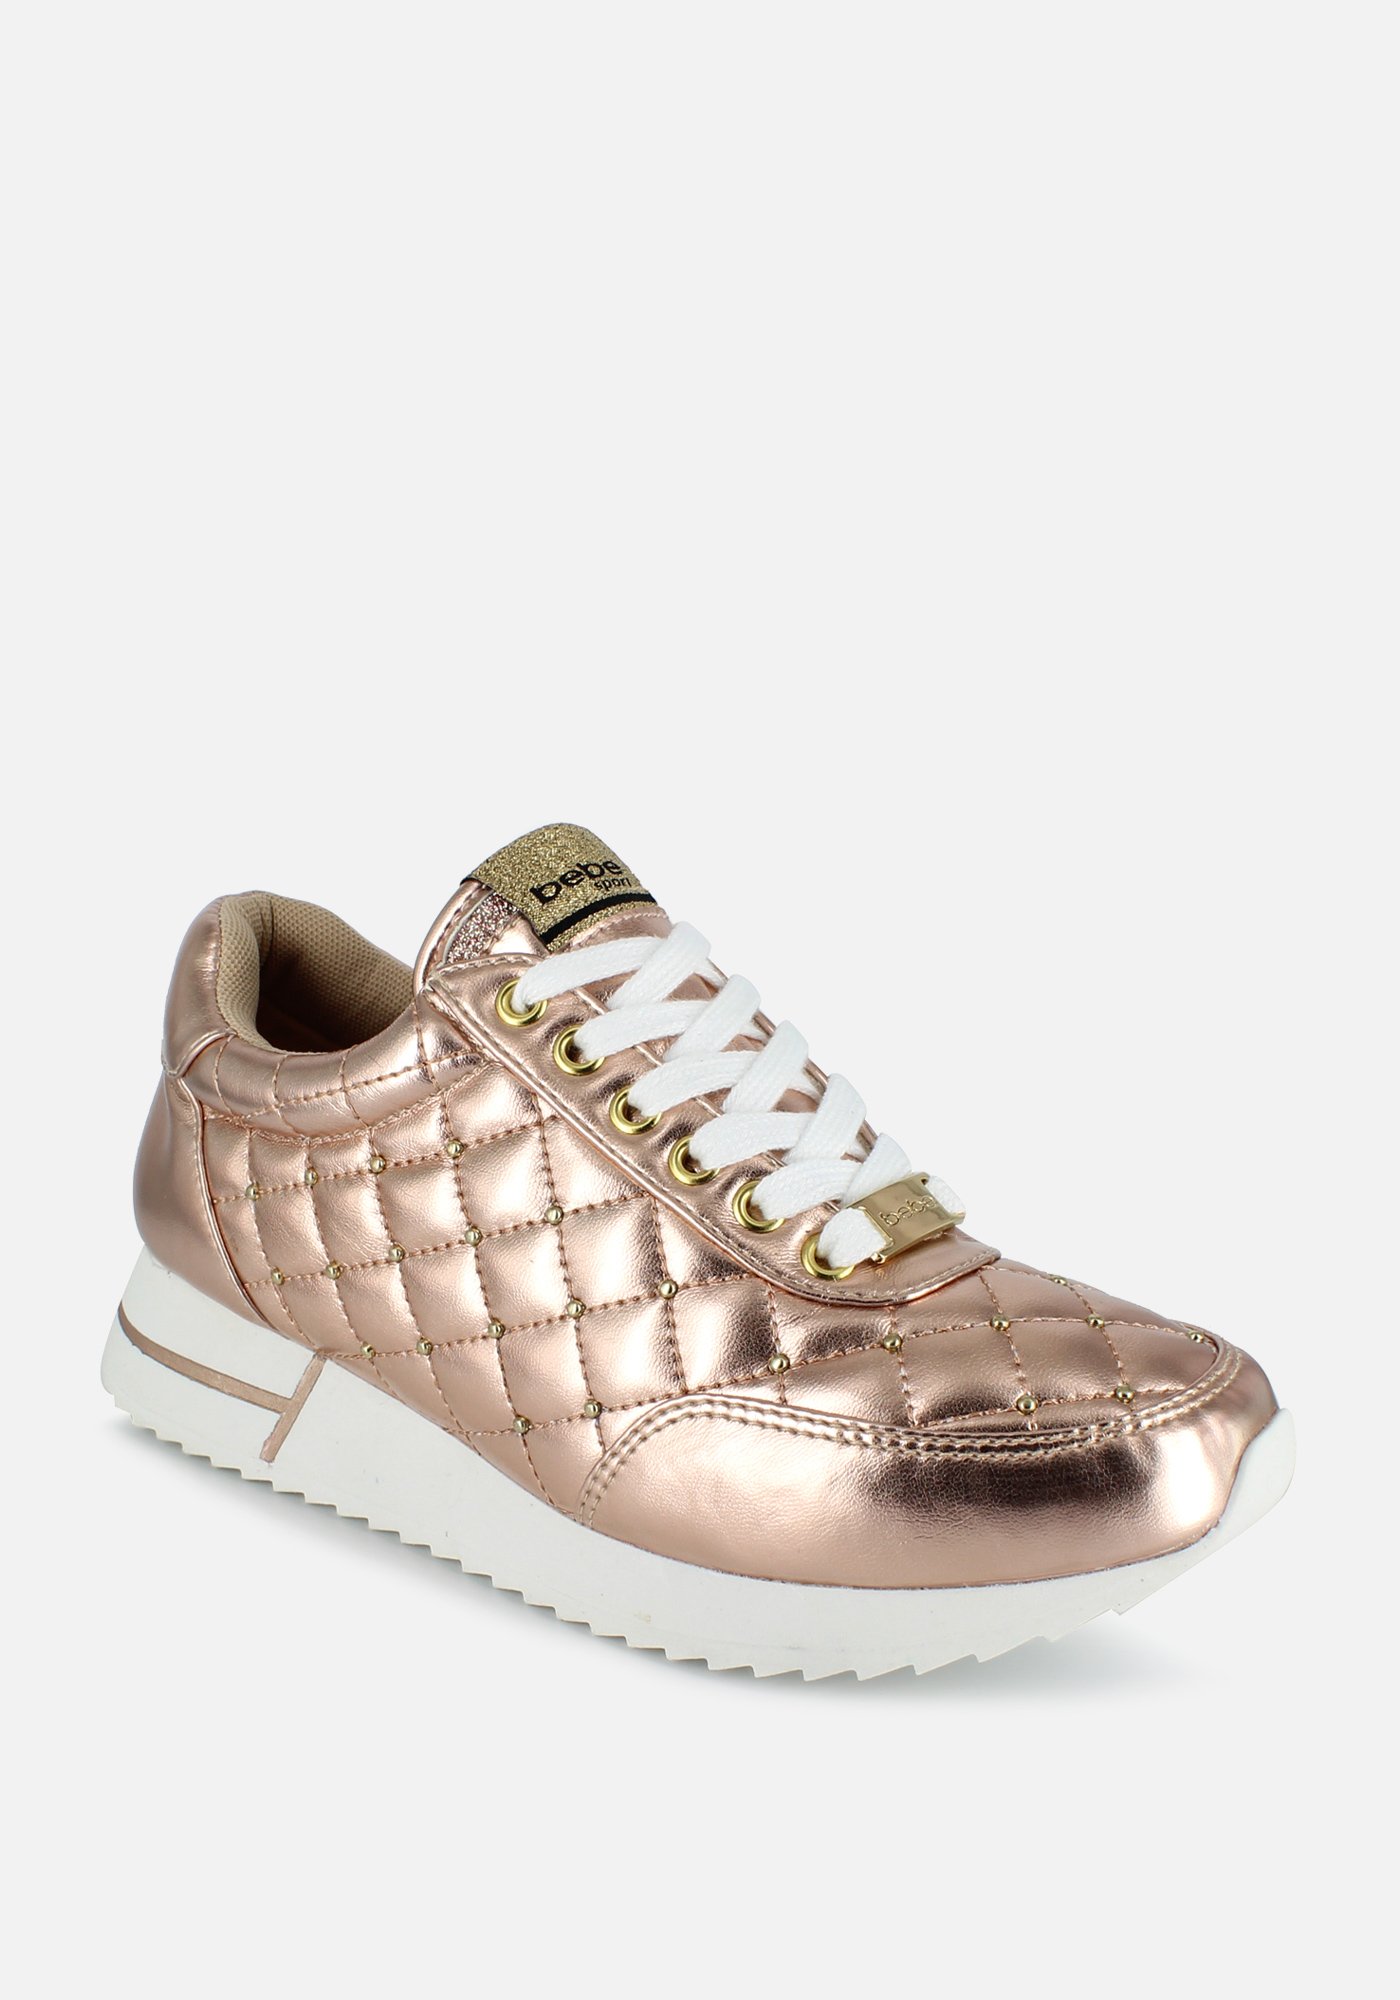 Bebe Women's Barkley Quilted Sneakers, Size 11 in Rose Gold Synthetic